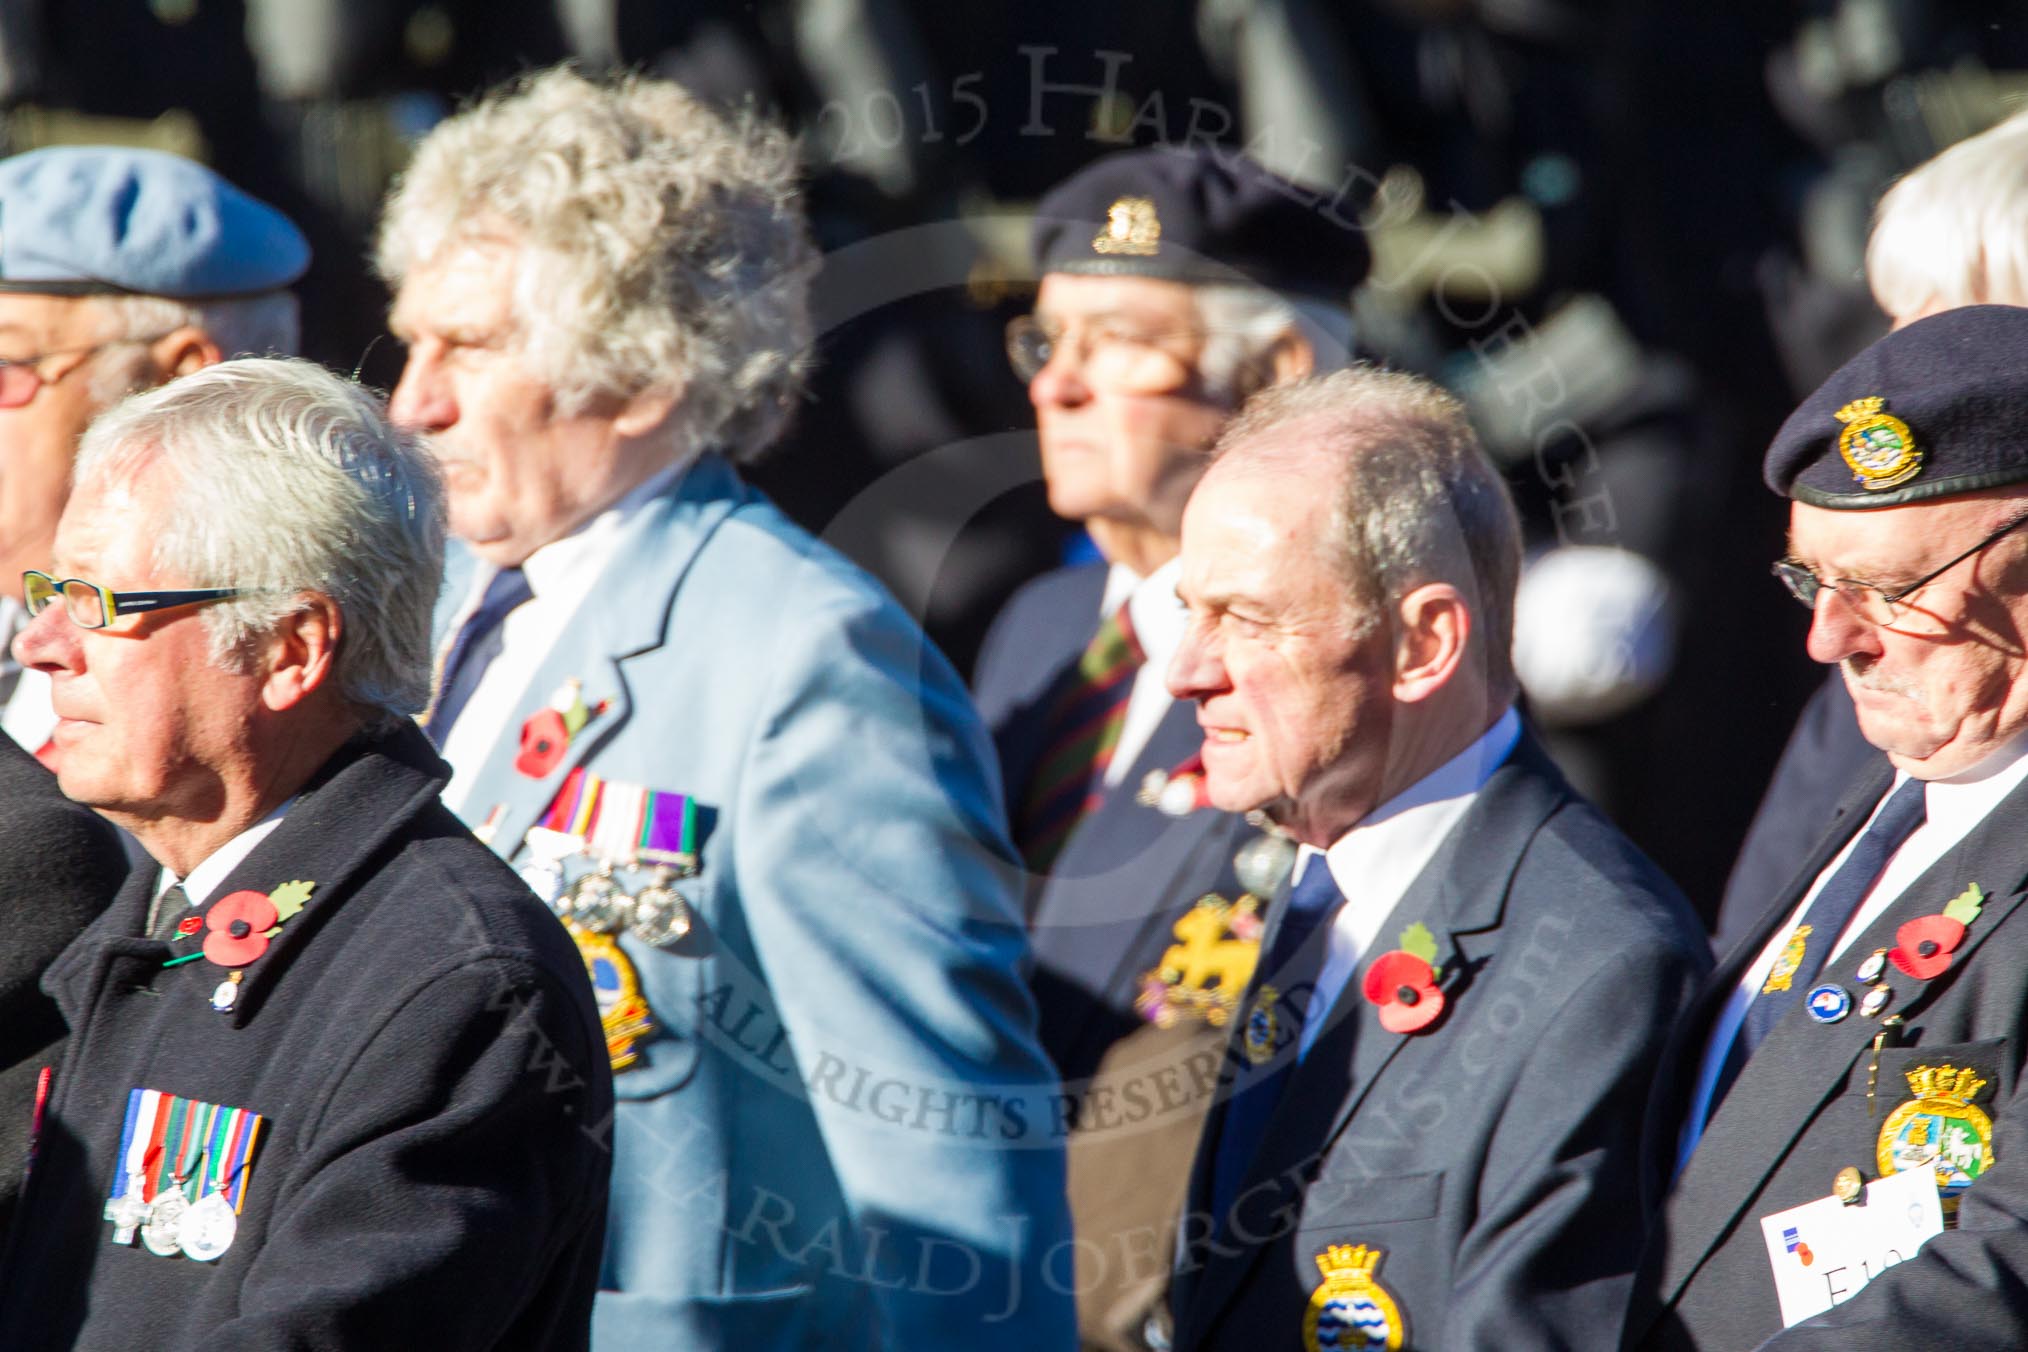 Remembrance Sunday Cenotaph March Past 2013: E18 - HMS Andromeda Association..
Press stand opposite the Foreign Office building, Whitehall, London SW1,
London,
Greater London,
United Kingdom,
on 10 November 2013 at 11:46, image #488